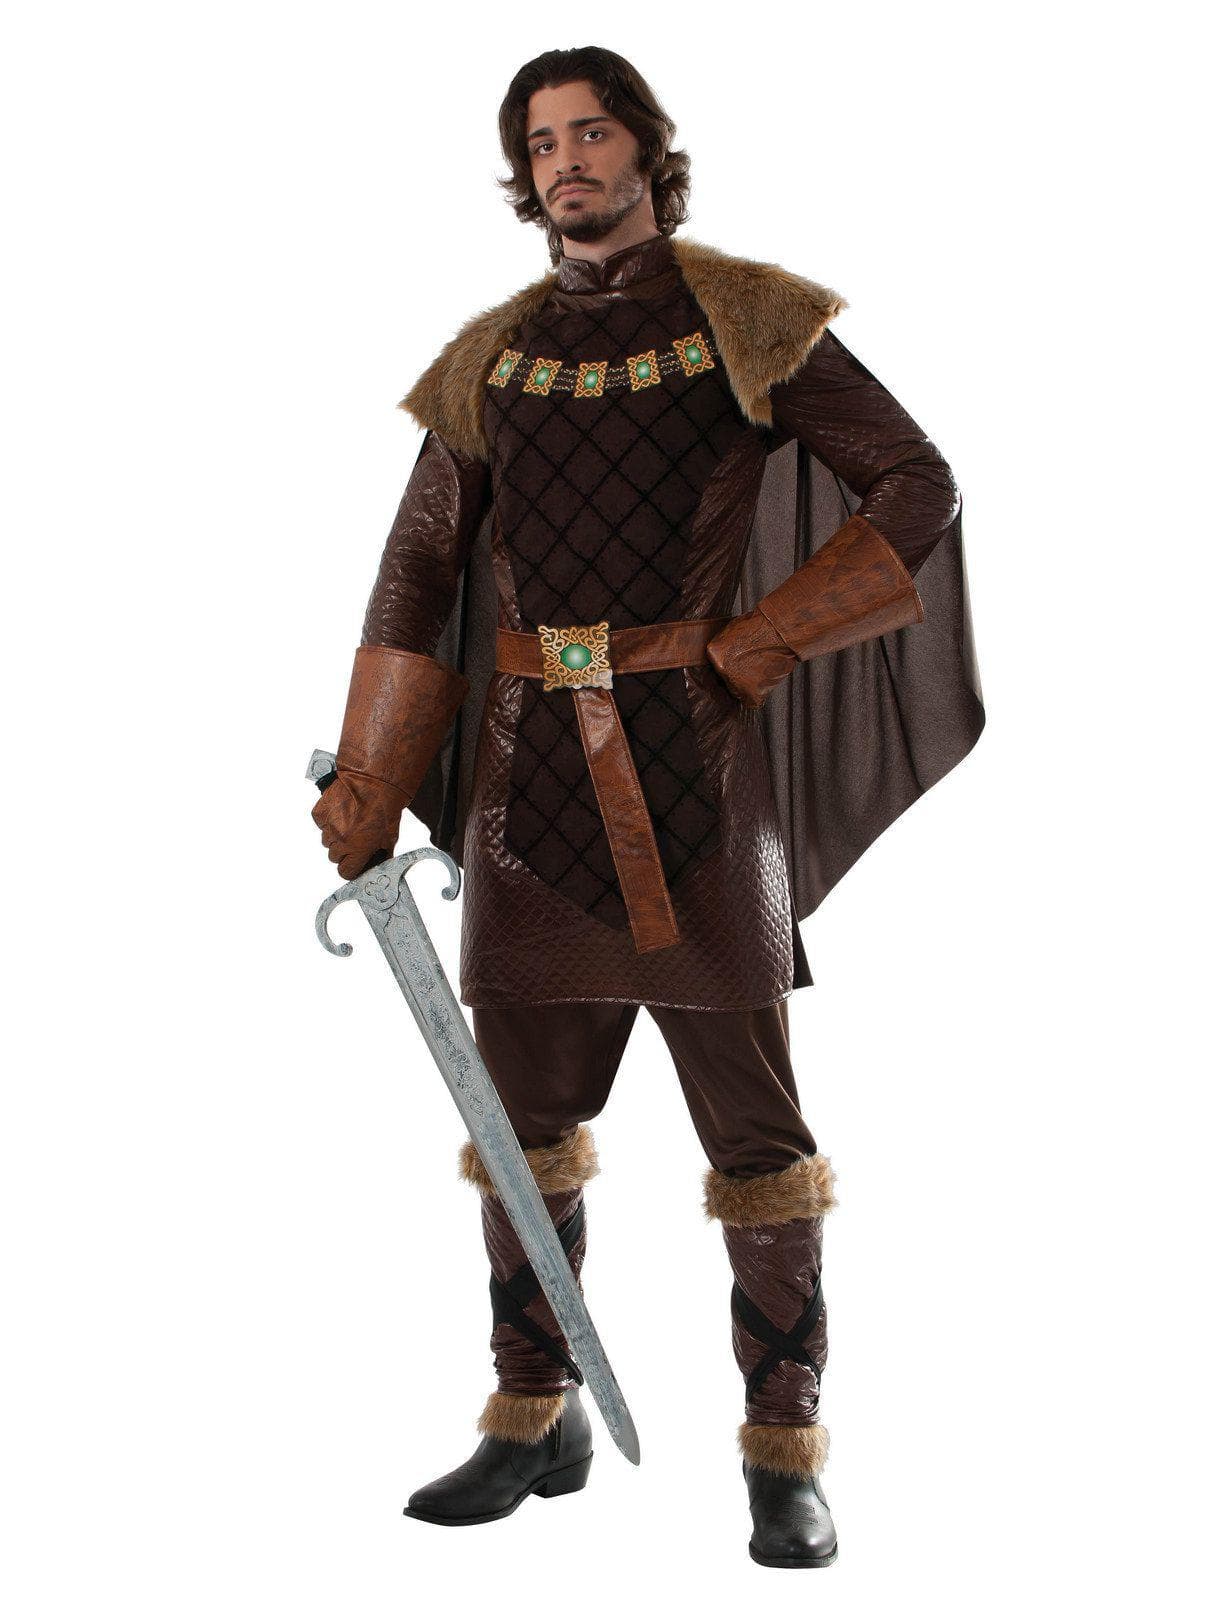 Adult Deluxe Forest Prince Costume - costumes.com